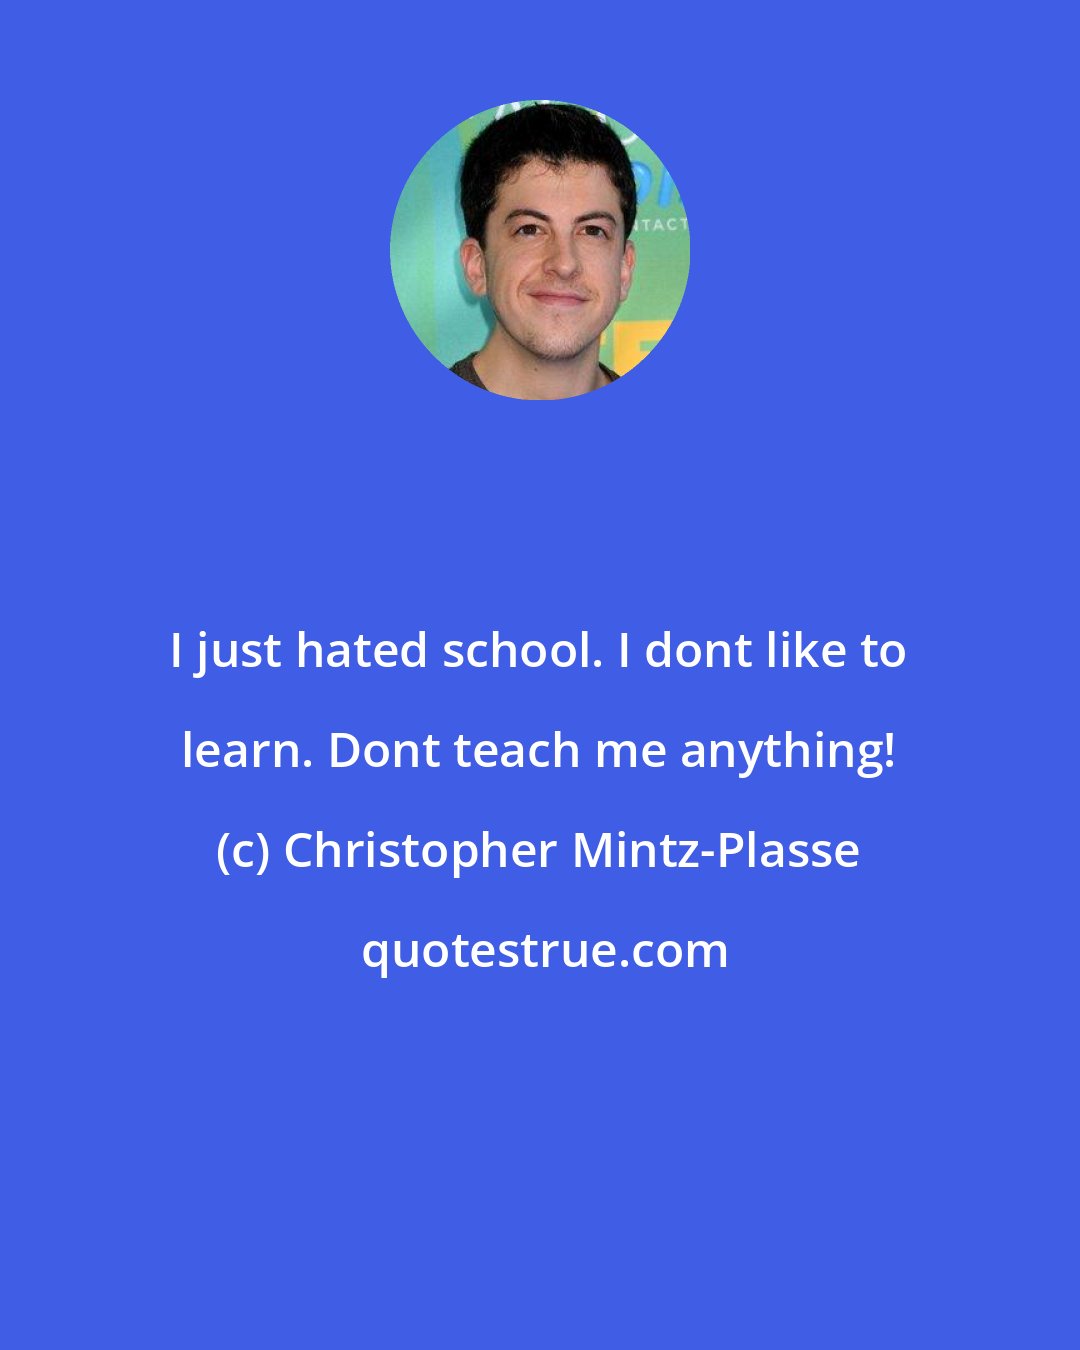 Christopher Mintz-Plasse: I just hated school. I dont like to learn. Dont teach me anything!